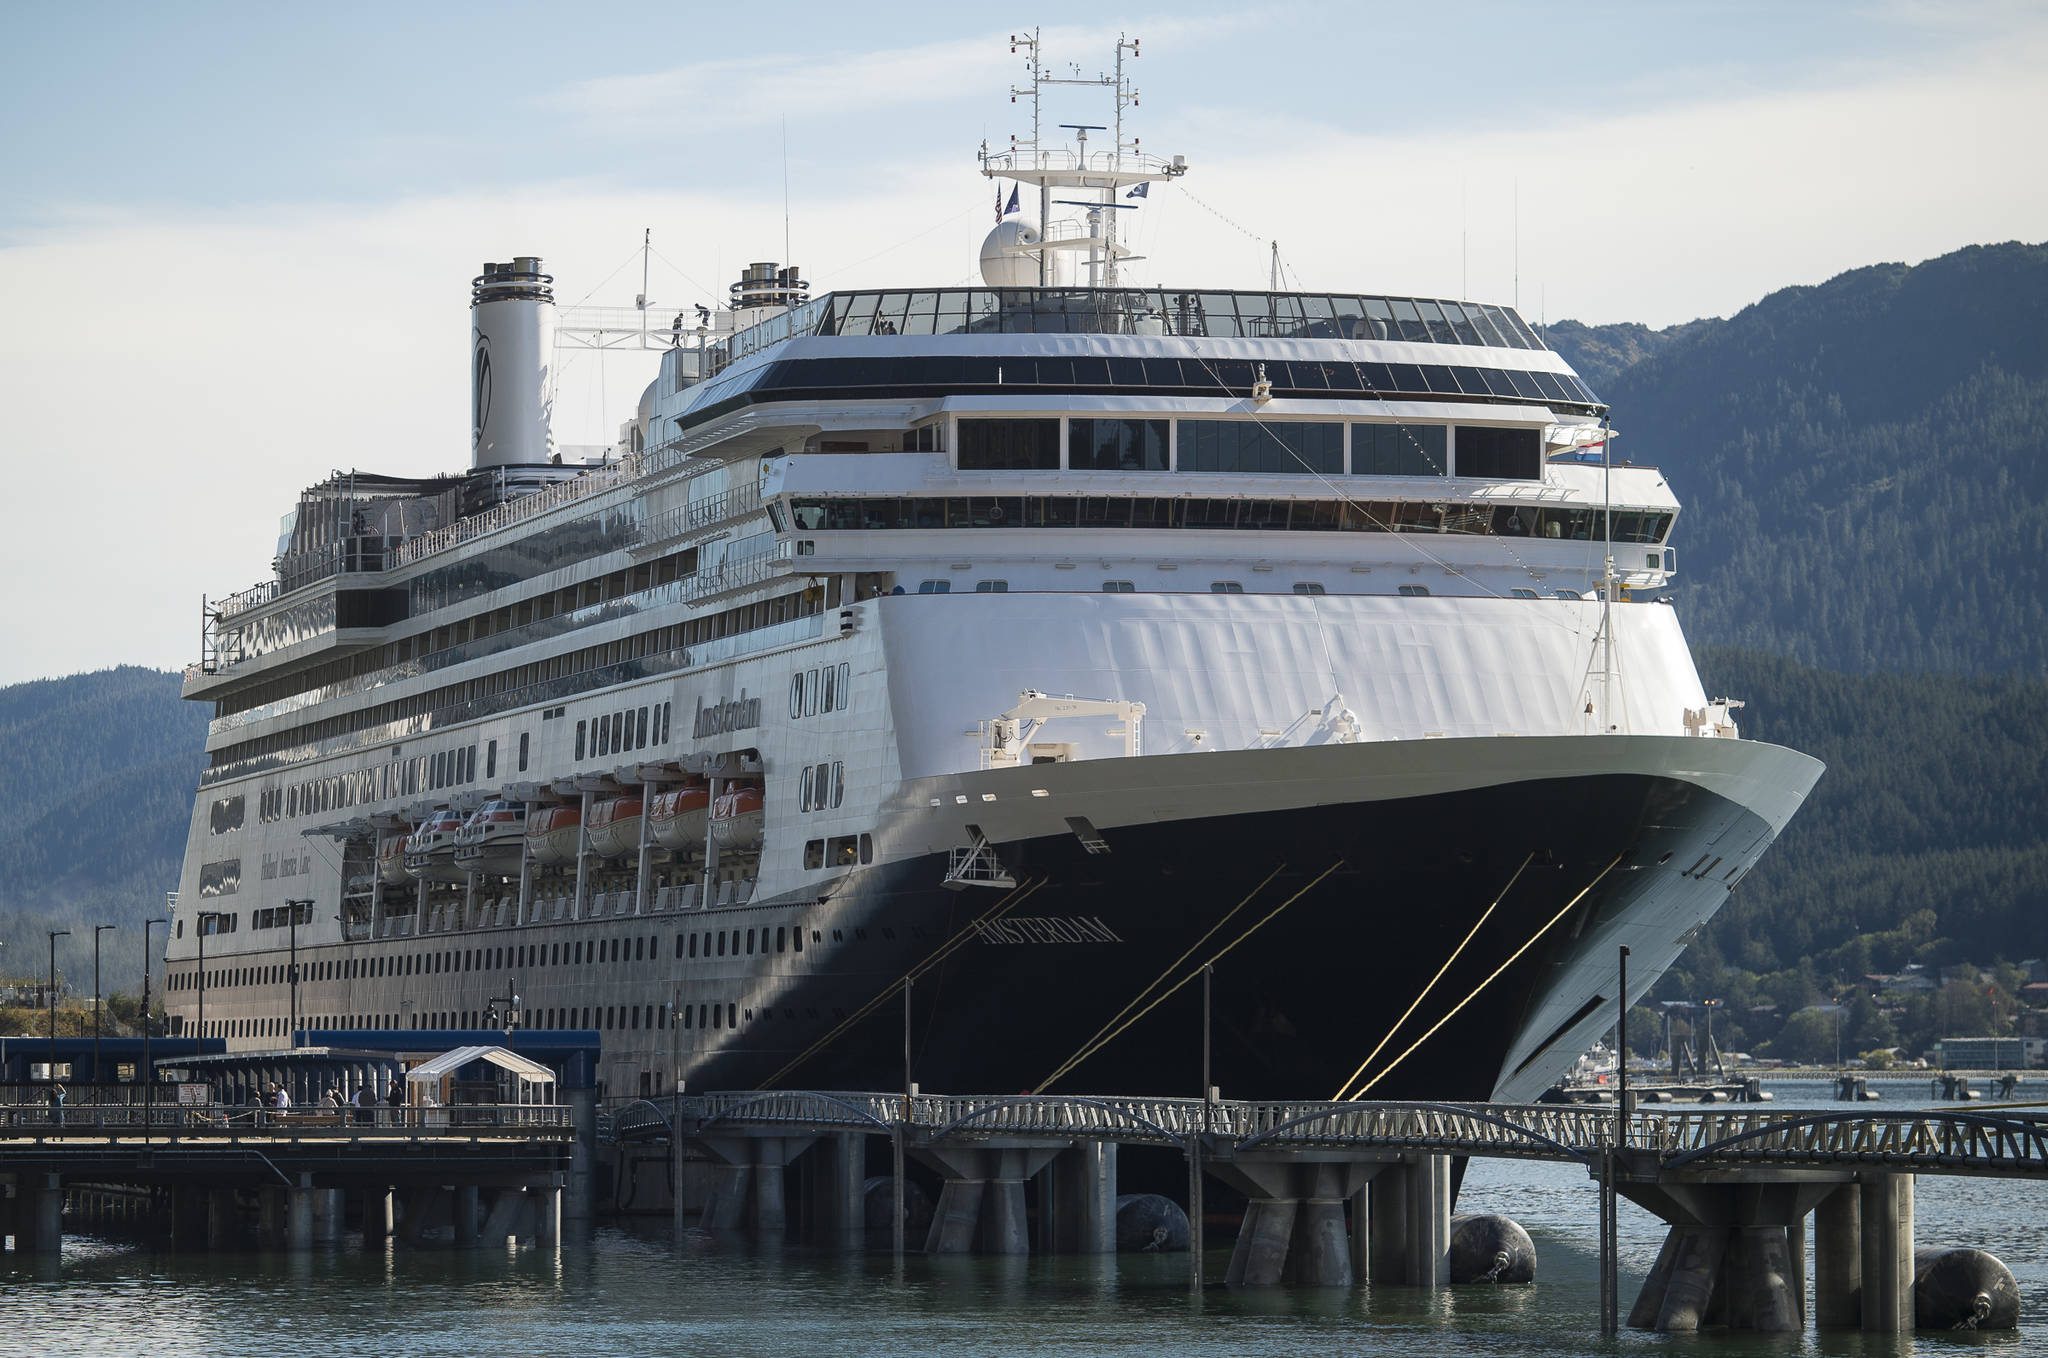 Opinion: No harm, no foul with city, cruise lawsuit settlement